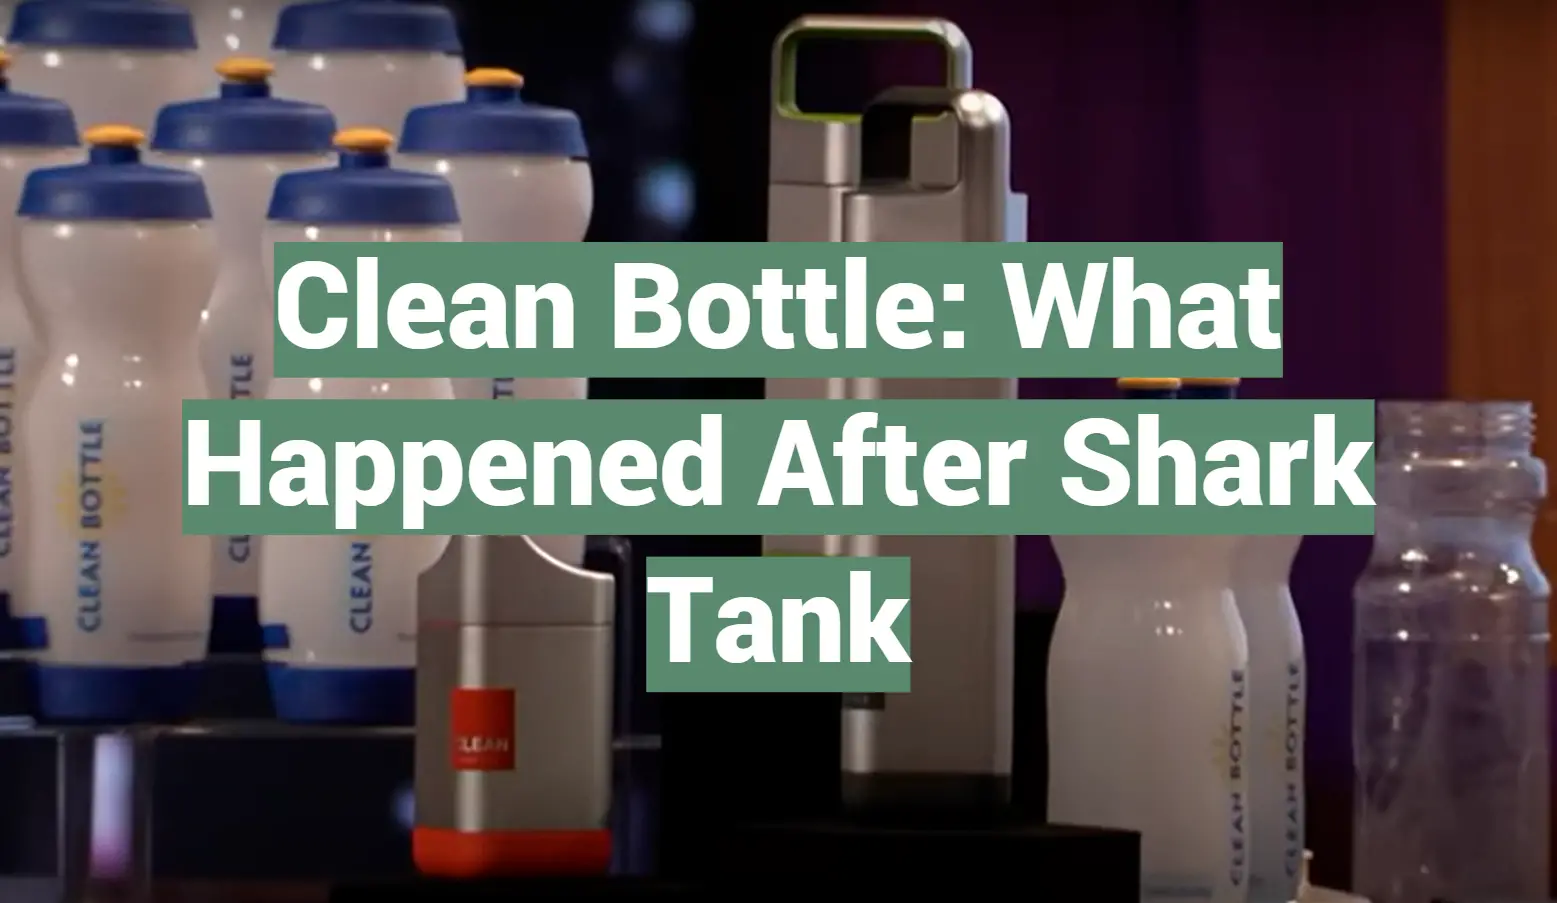 Clean Bottle: What Happened After Shark Tank